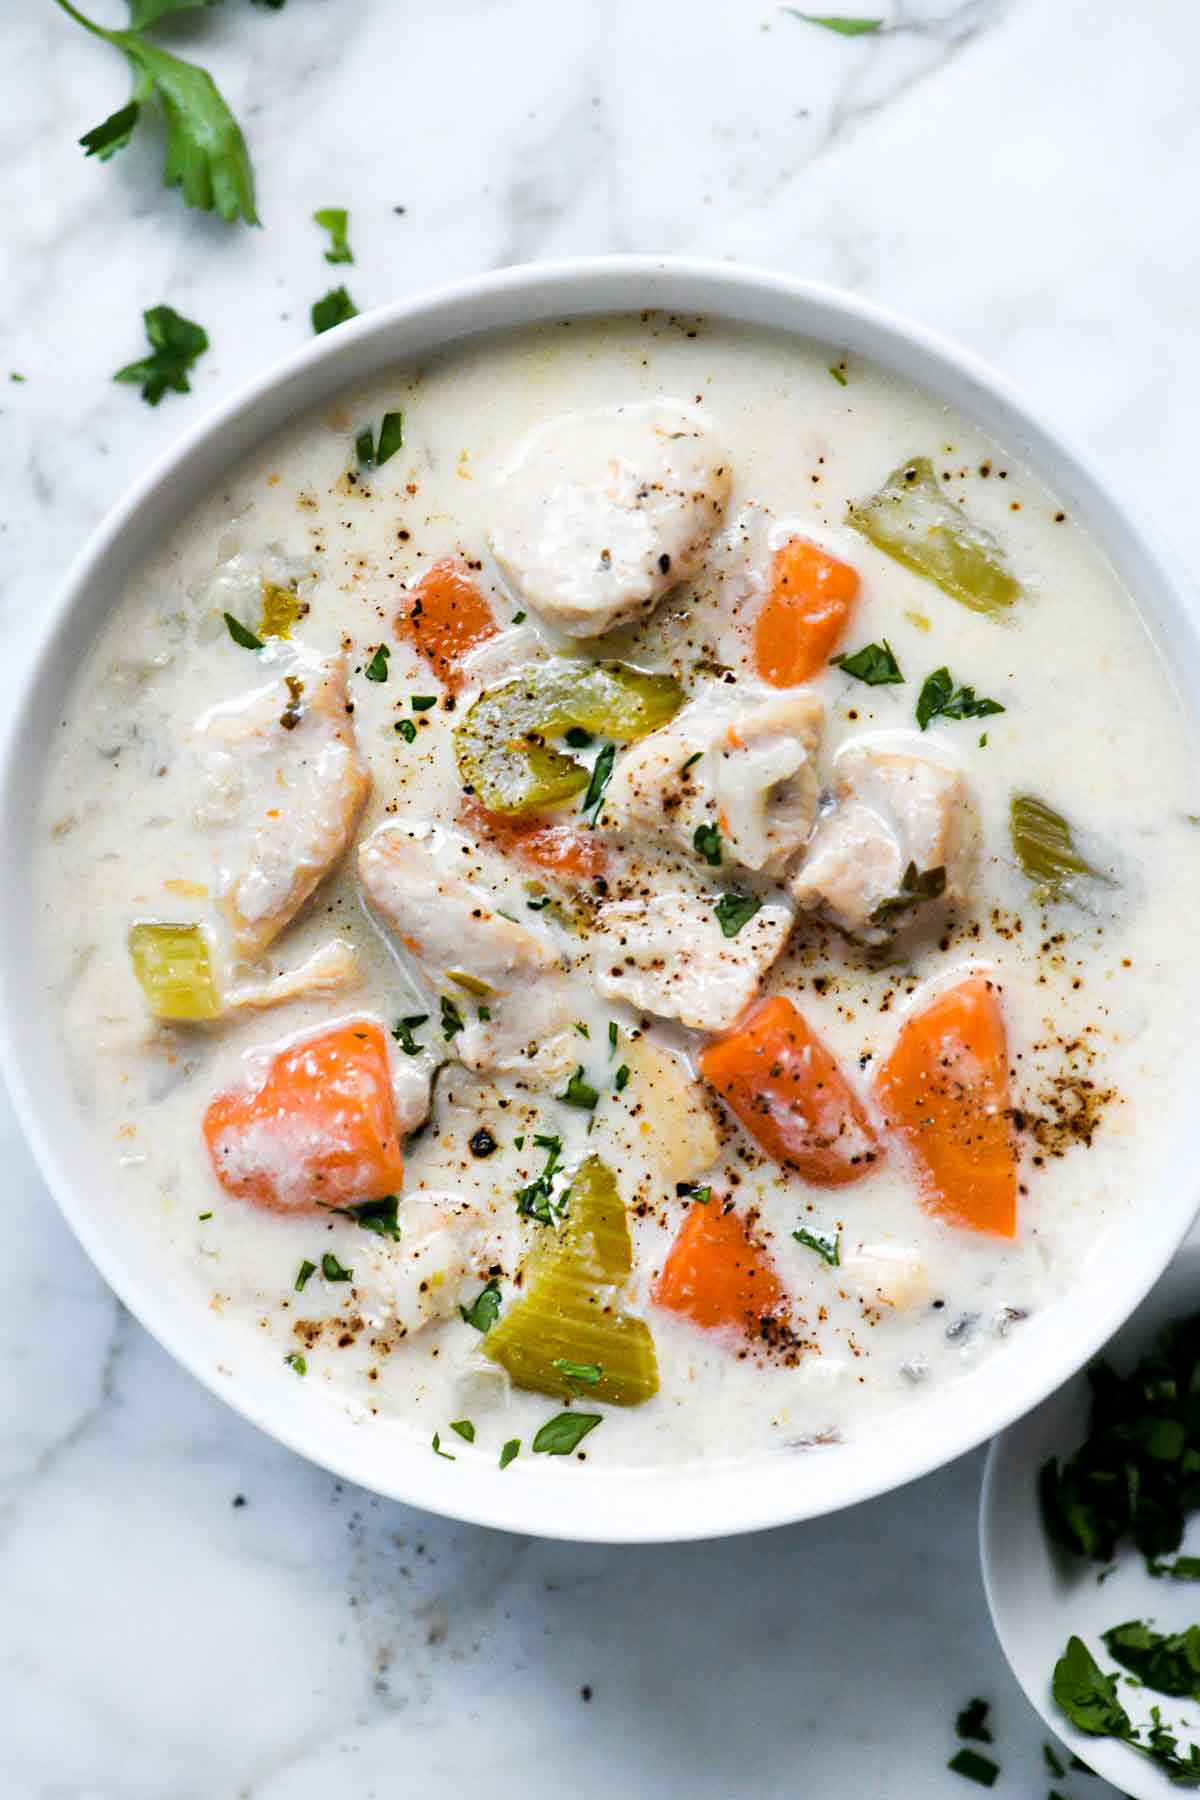 Creamy Chicken and Wild Rice Soup Instant Pot | foodiecrush.com